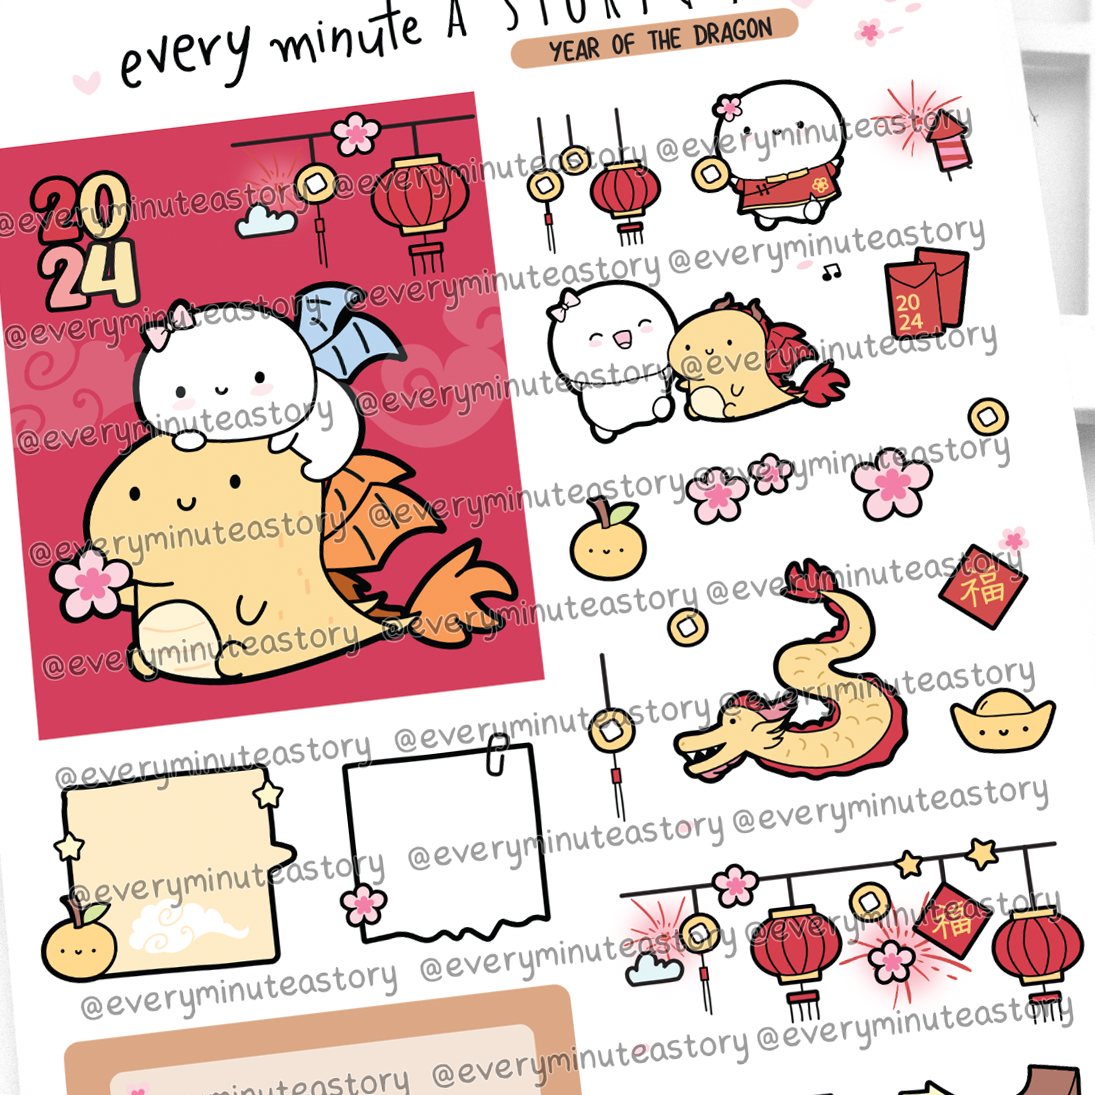 2024 Year At A Glance Stickers – TheCoffeeMonsterzCo